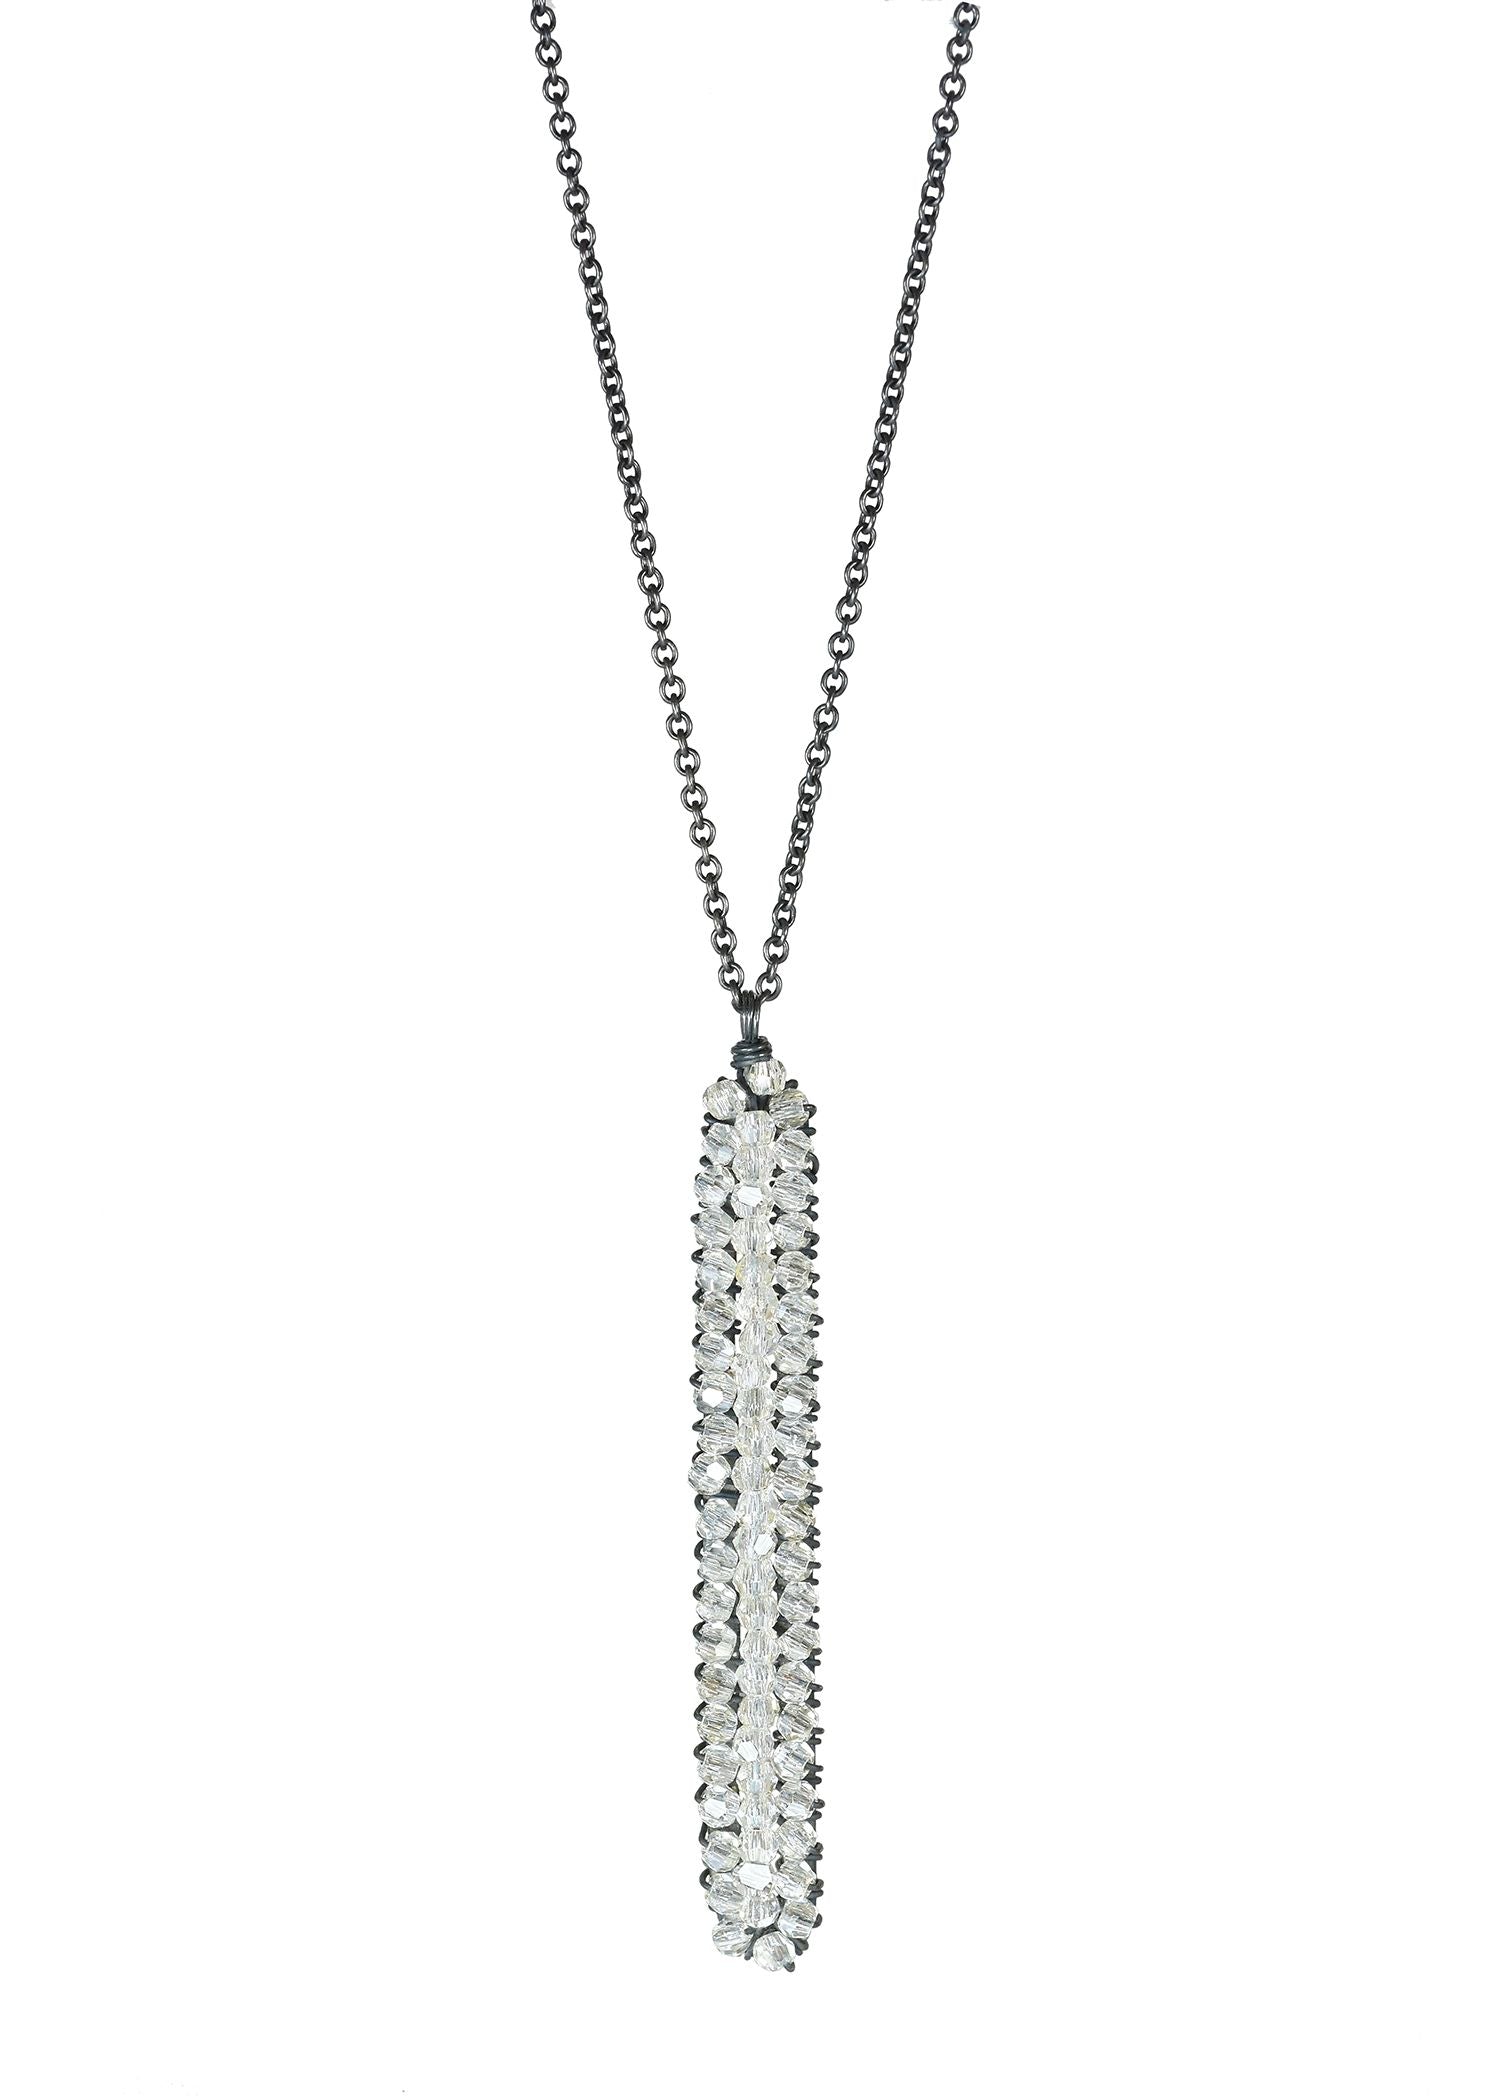 Crystal Blackened sterling silver Necklace measures 17-1/8” Pendant measures 1-11/16” in length and 3/16” in width Handmade in our Los Angeles studio